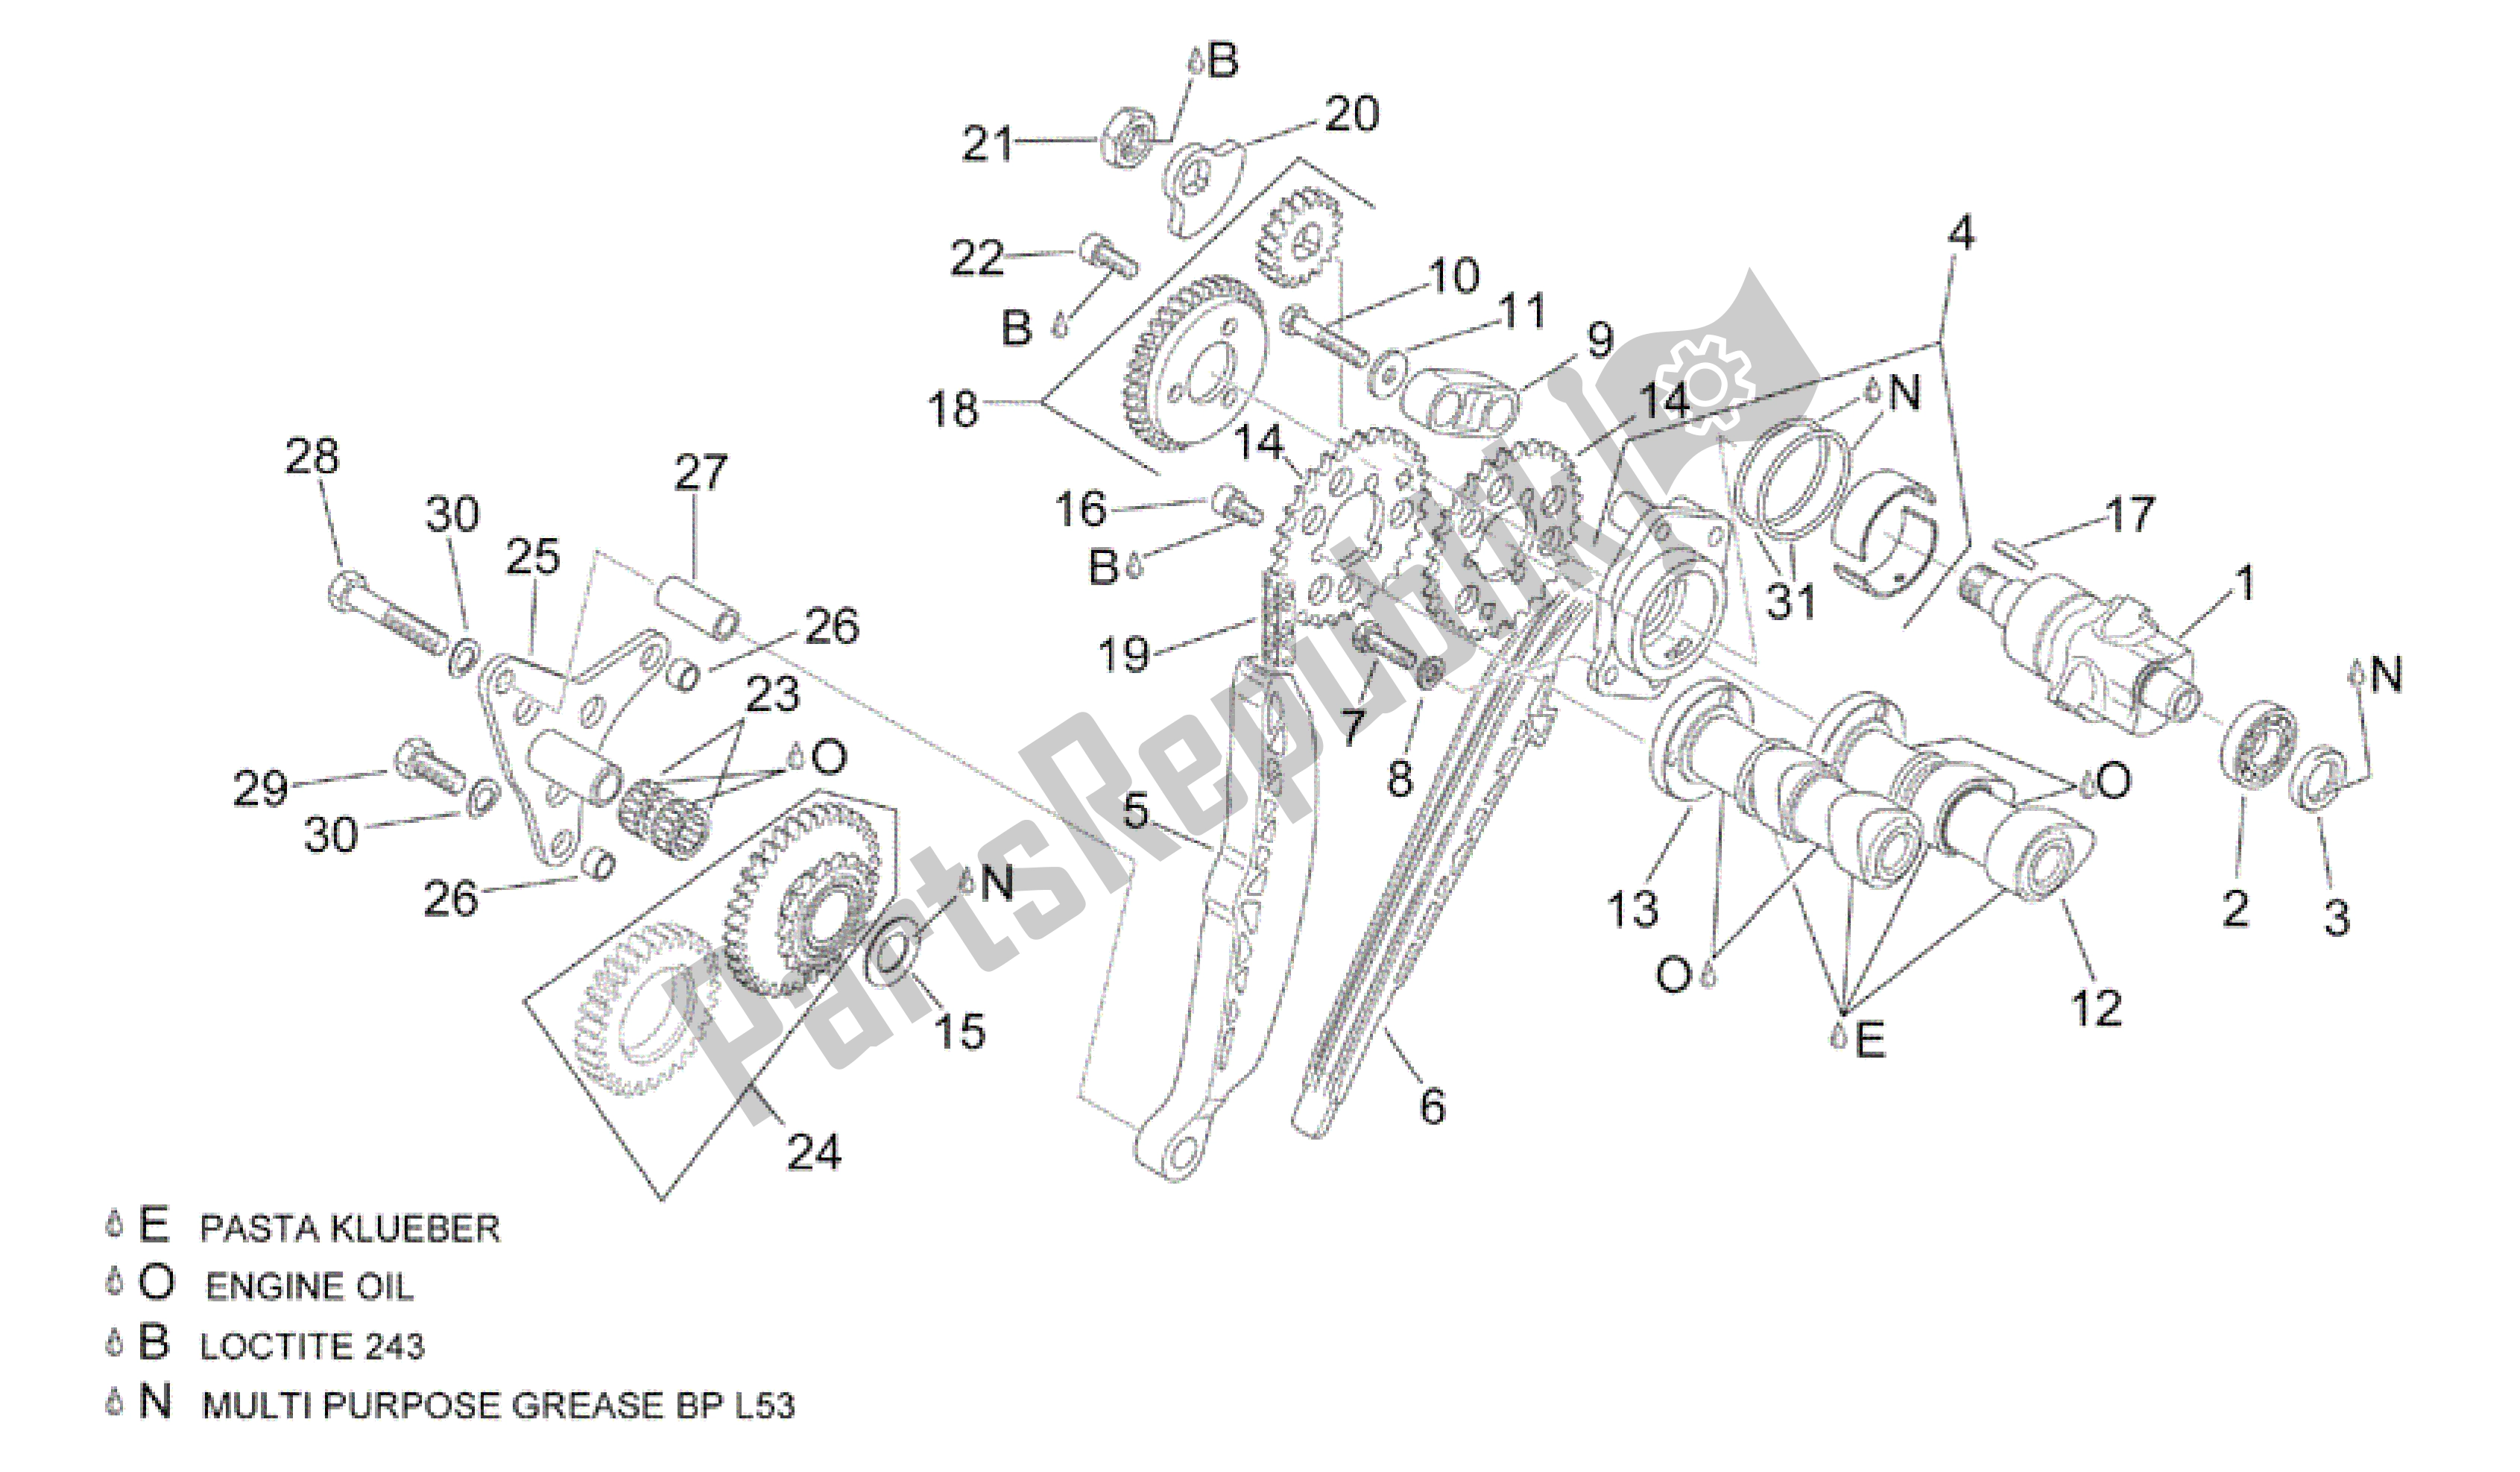 All parts for the Rear Cylinder Timing System of the Aprilia RSV Mille 3963 1000 2003